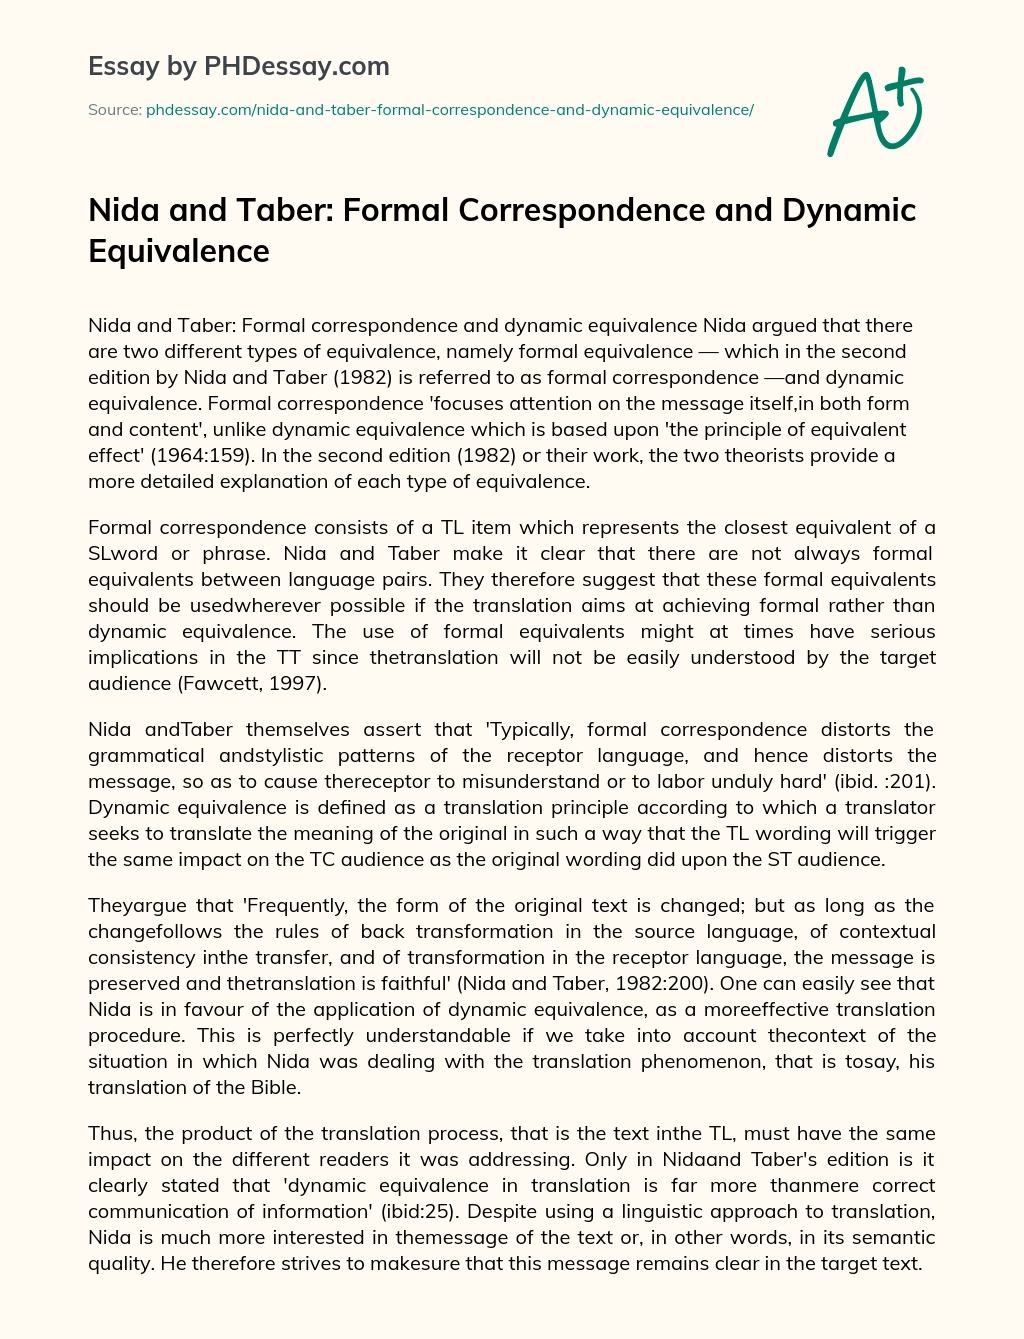 Nida and Taber: Formal Correspondence and Dynamic Equivalence essay